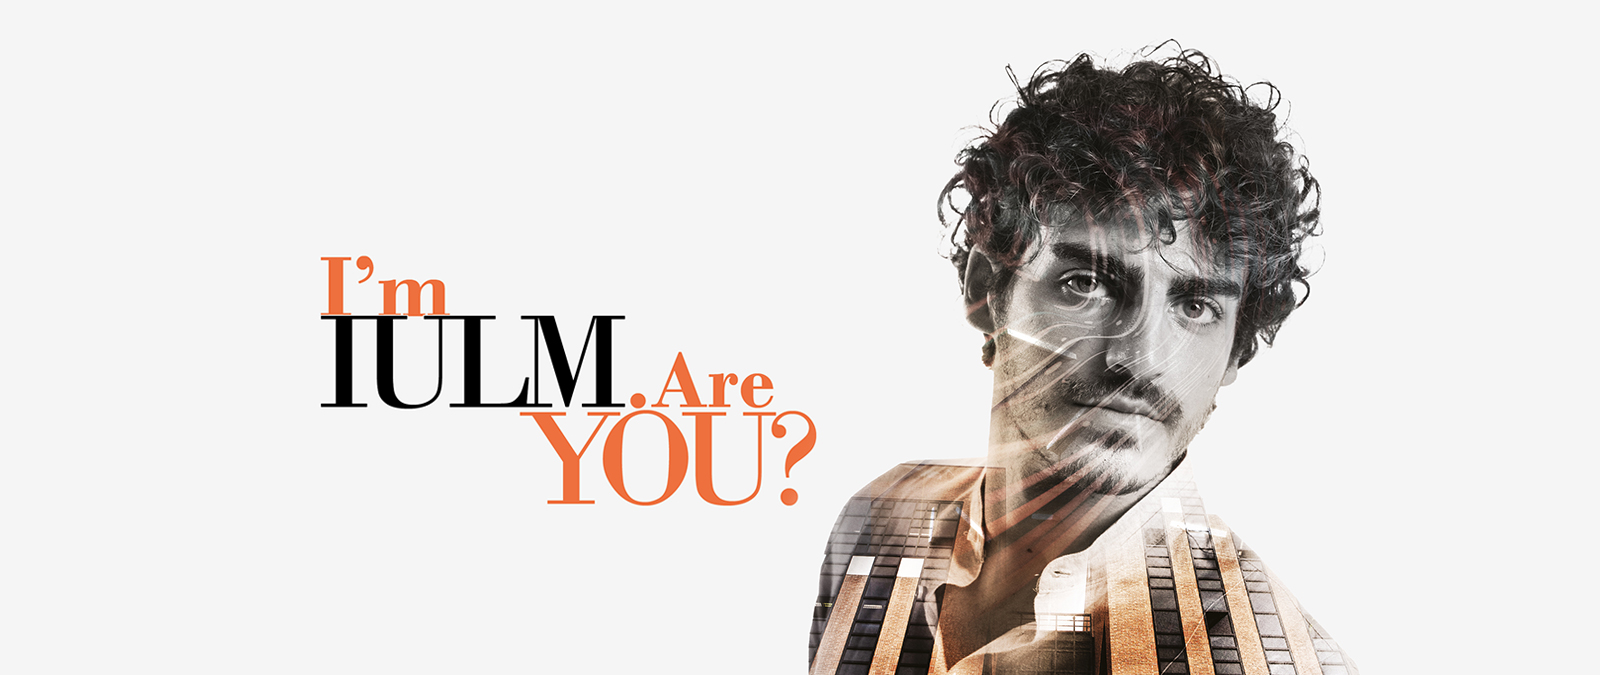 "I'm IULM. Are you?" A call for proposals for the new IULM campaign